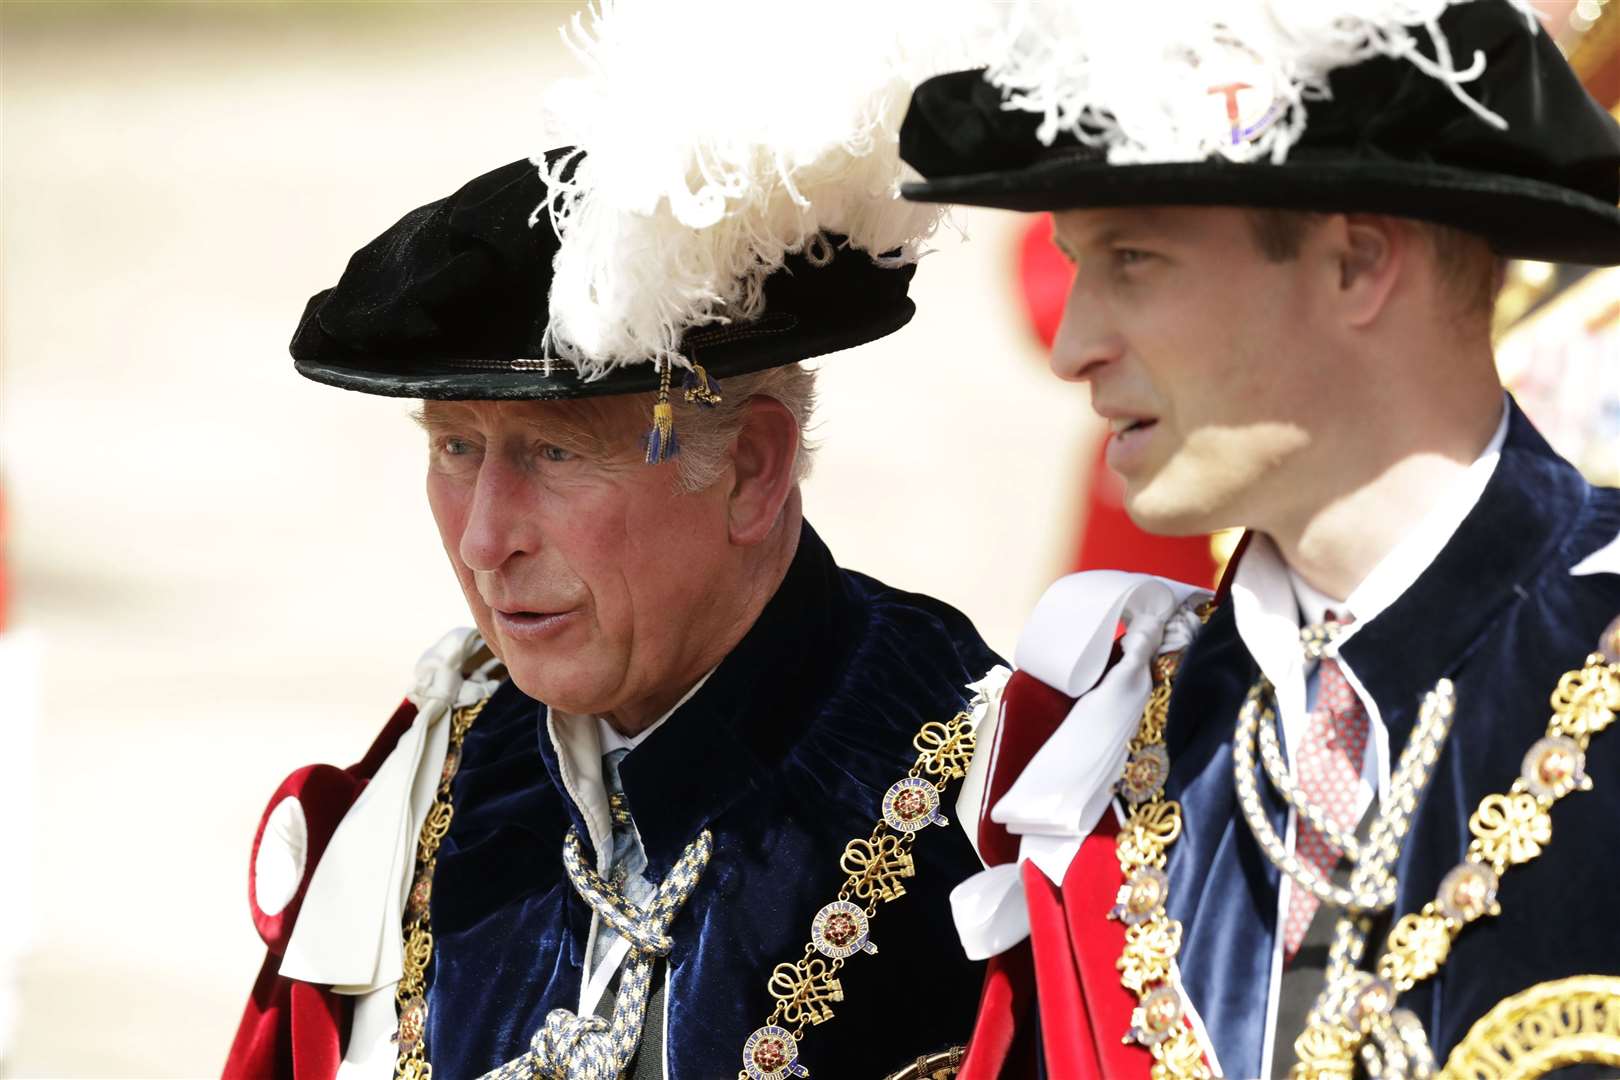 The Prince of Wales is now King and the Duke of Cambridge the heir to the throne (Matt Dunham/PA)